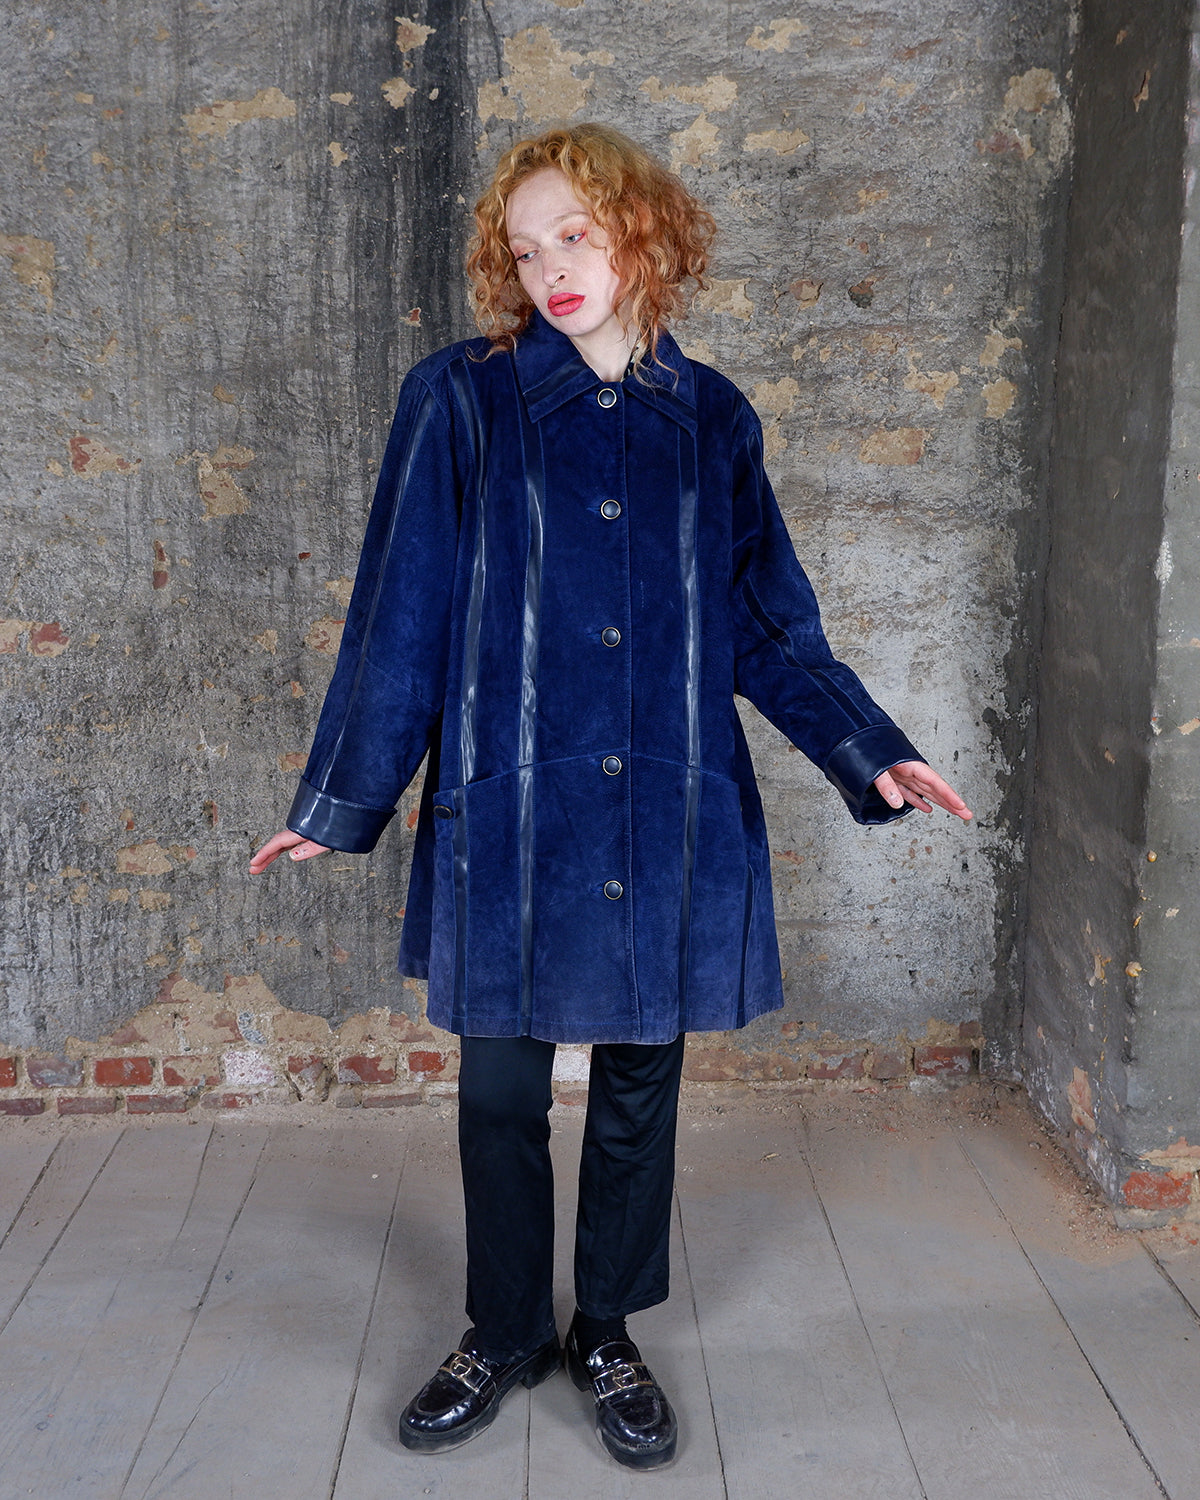 This vintage oversized navy blue leather coat (thin!) features shoulder pads and a relaxed fit, exuding effortless style. The eye-catching navy blue color is complemented by faux leather stripes, adding a touch of edge. Ideal for sizes L and XL, this coat is a true representation of vintage fashion.